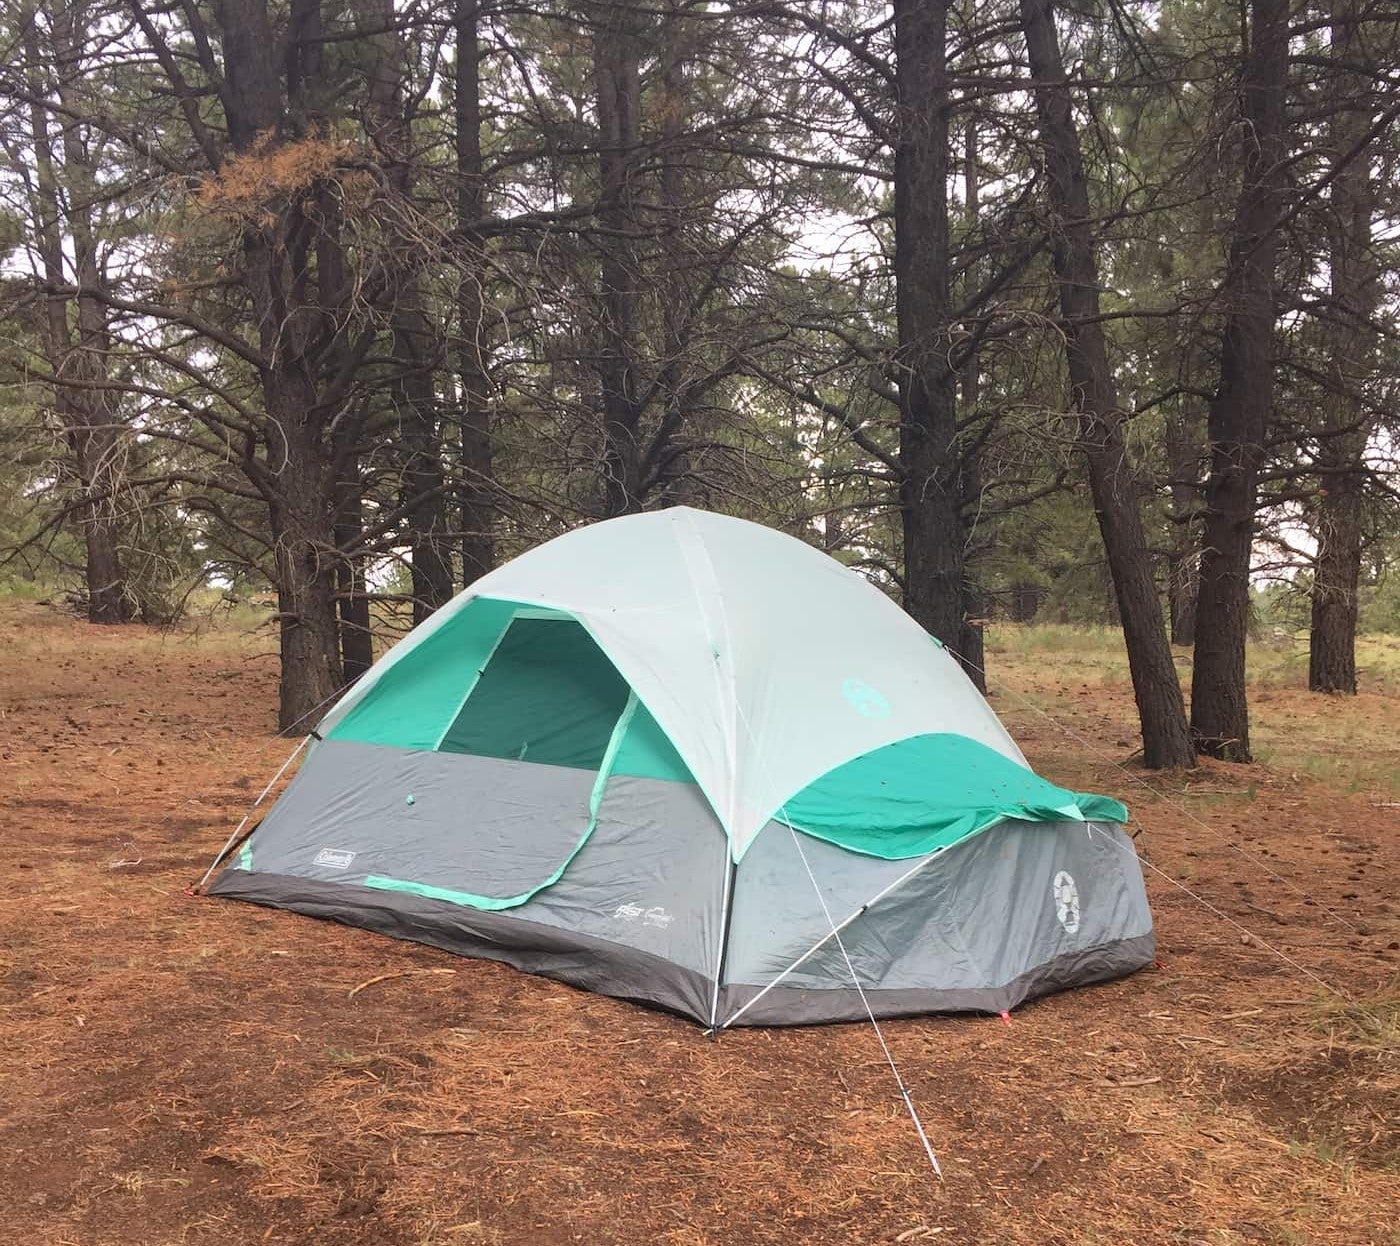 Teal and grey tent set up on cleared ground at Uinta Flats.